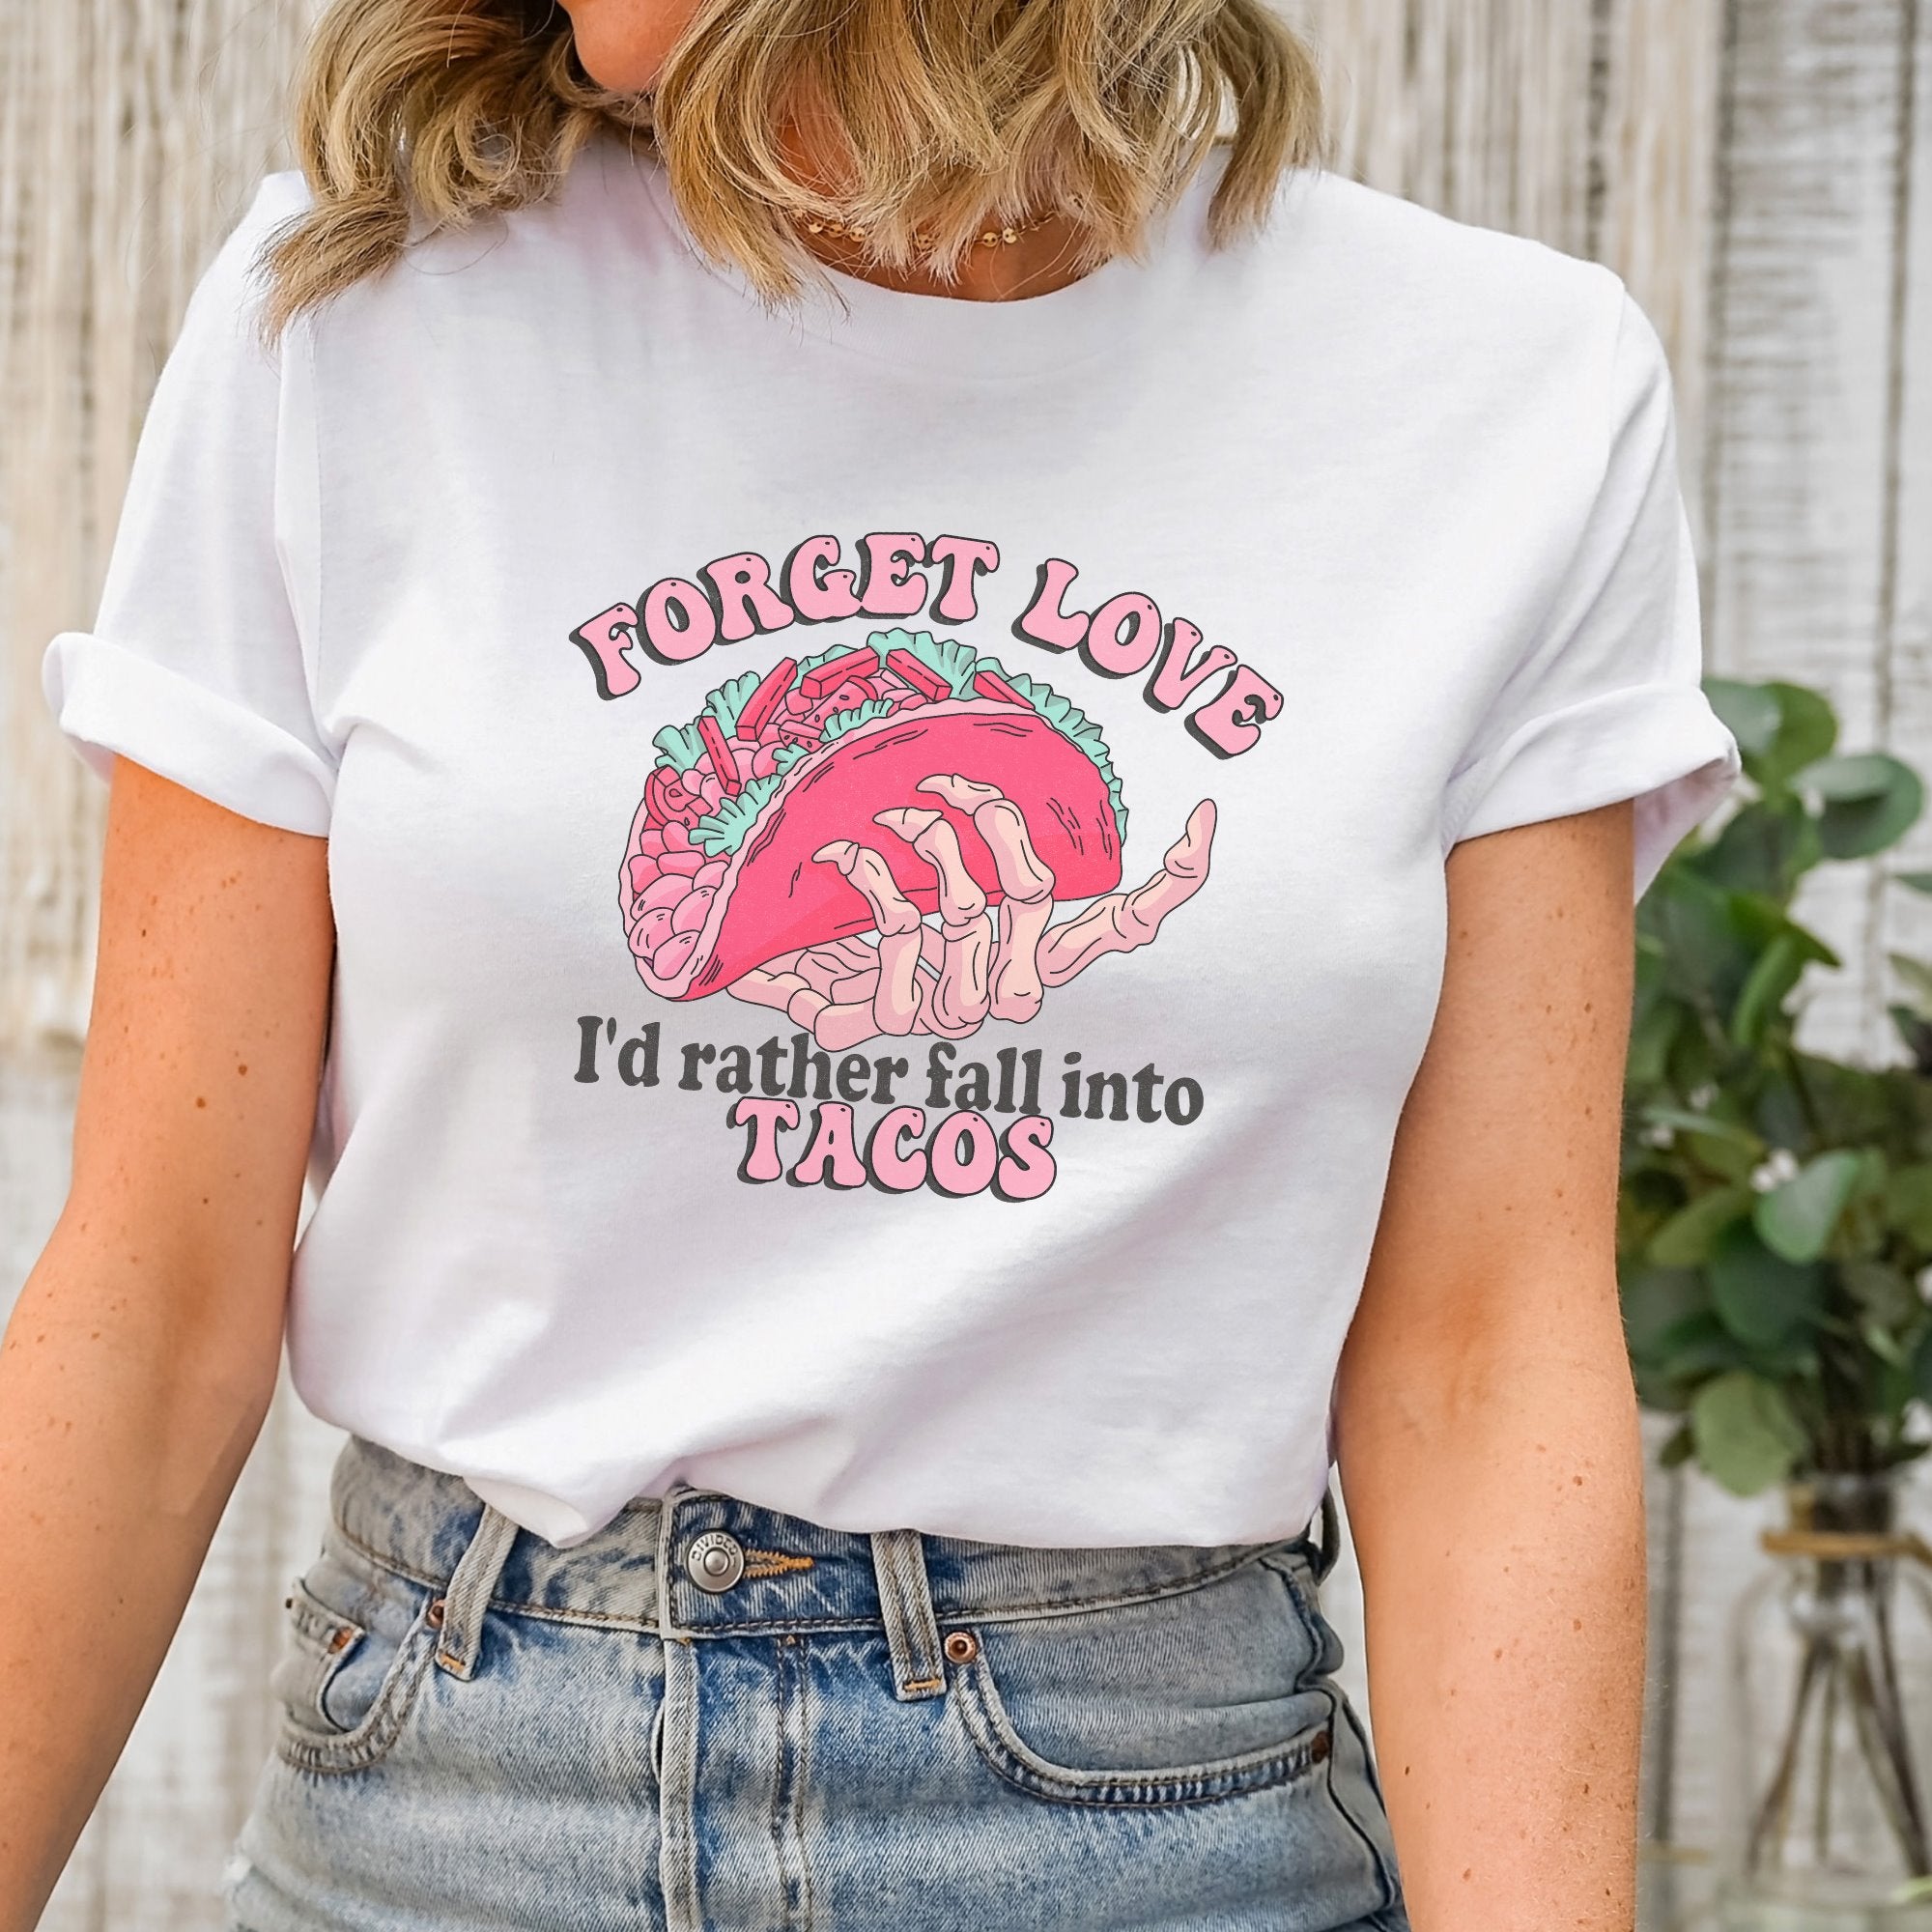 Forget love, I'd rather fall into tacos